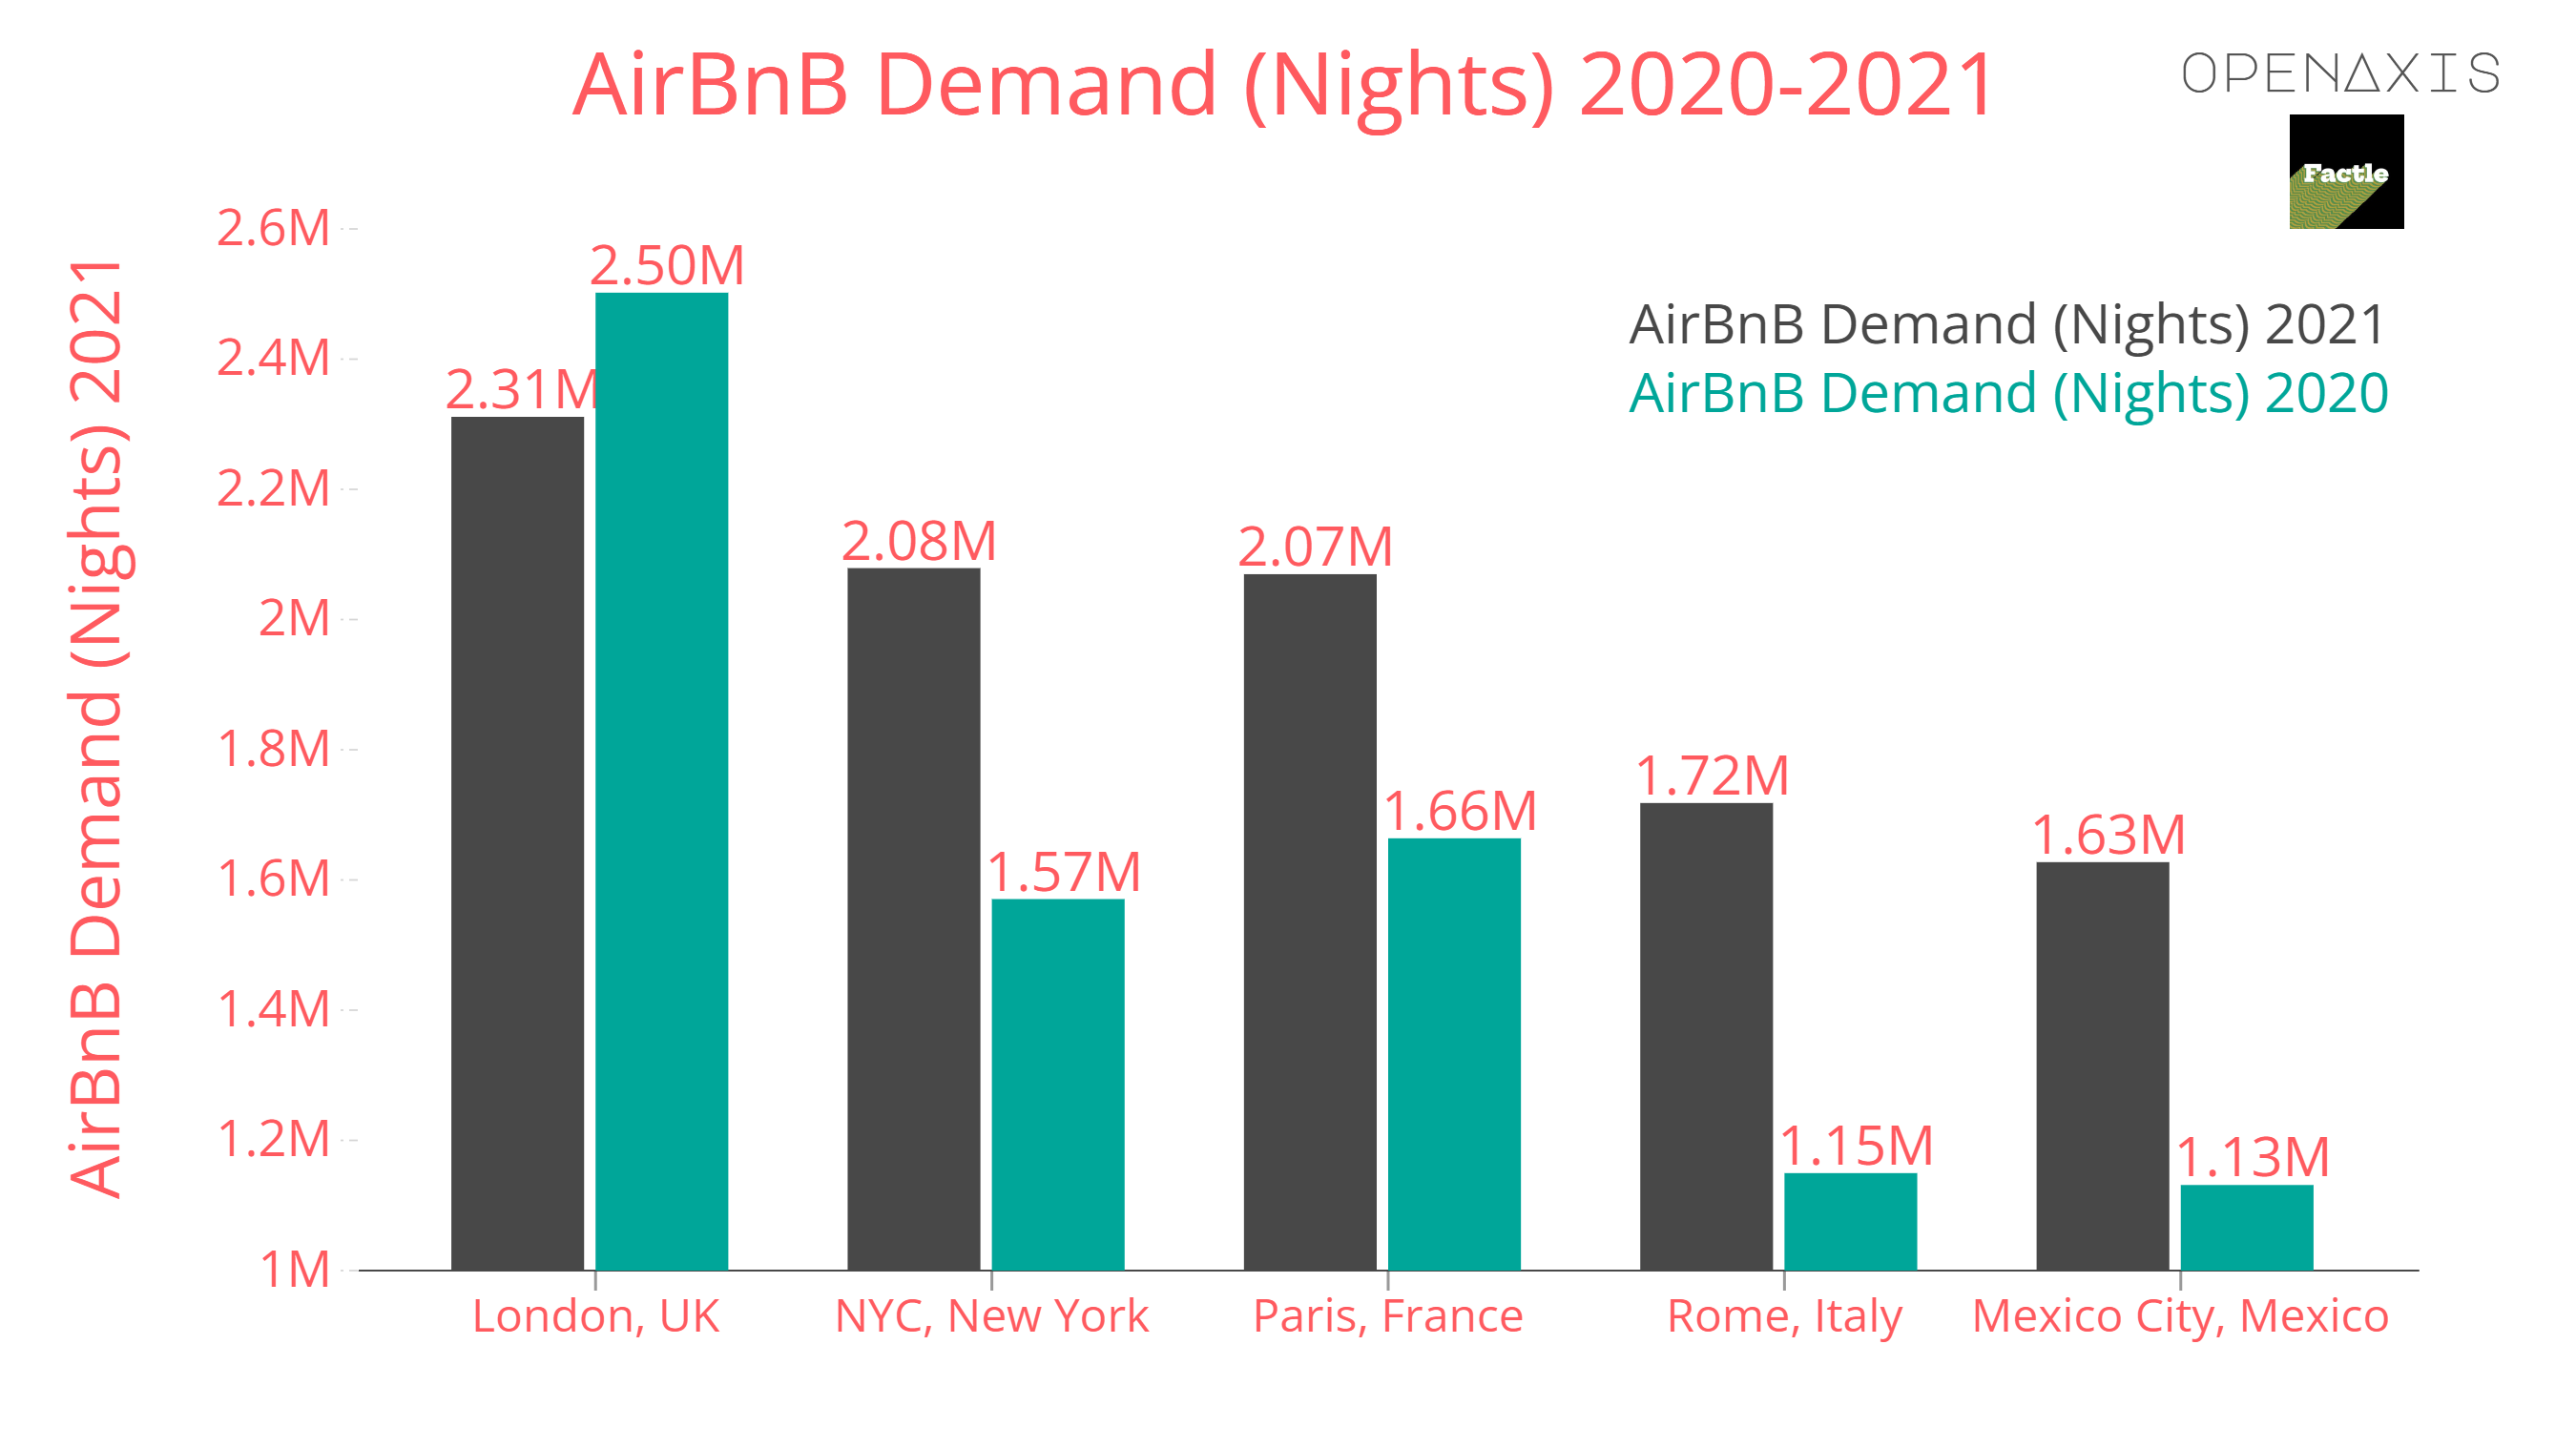 <p>Top 5 AirBnB cities by nights stayed (demand) in 2021 vs 2020. Check out the full dataset to see the Top 10 segmented by nights stayed, gross revenues, and active listings!</p><p><span data-index="0" data-denotation-char data-id="0" data-value="&lt;a href=&quot;/search?q=%23travel&quot; target=_self&gt;#travel" data-link="/search?q=%23travel">﻿<span contenteditable="false"><span></span><a href="/search?q=%23travel" target="_self">#travel</a></span>﻿</span> <span data-index="0" data-denotation-char data-id="0" data-value="&lt;a href=&quot;/search?q=%23airbnb&quot; target=_self&gt;#airbnb" data-link="/search?q=%23airbnb">﻿<span contenteditable="false"><span></span><a href="/search?q=%23airbnb" target="_self">#airbnb</a></span>﻿</span> <span data-index="0" data-denotation-char data-id="0" data-value="&lt;a href=&quot;/search?q=%23vacation&quot; target=_self&gt;#vacation" data-link="/search?q=%23vacation">﻿<span contenteditable="false"><span></span><a href="/search?q=%23vacation" target="_self">#vacation</a></span>﻿</span> <span data-index="0" data-denotation-char data-id="0" data-value="&lt;a href=&quot;/search?q=%23rental&quot; target=_self&gt;#rental" data-link="/search?q=%23rental">﻿<span contenteditable="false"><span></span><a href="/search?q=%23rental" target="_self">#rental</a></span>﻿</span> </p><p>Source: <a href="/data/3648" target="_blank">All The Rooms</a></p>